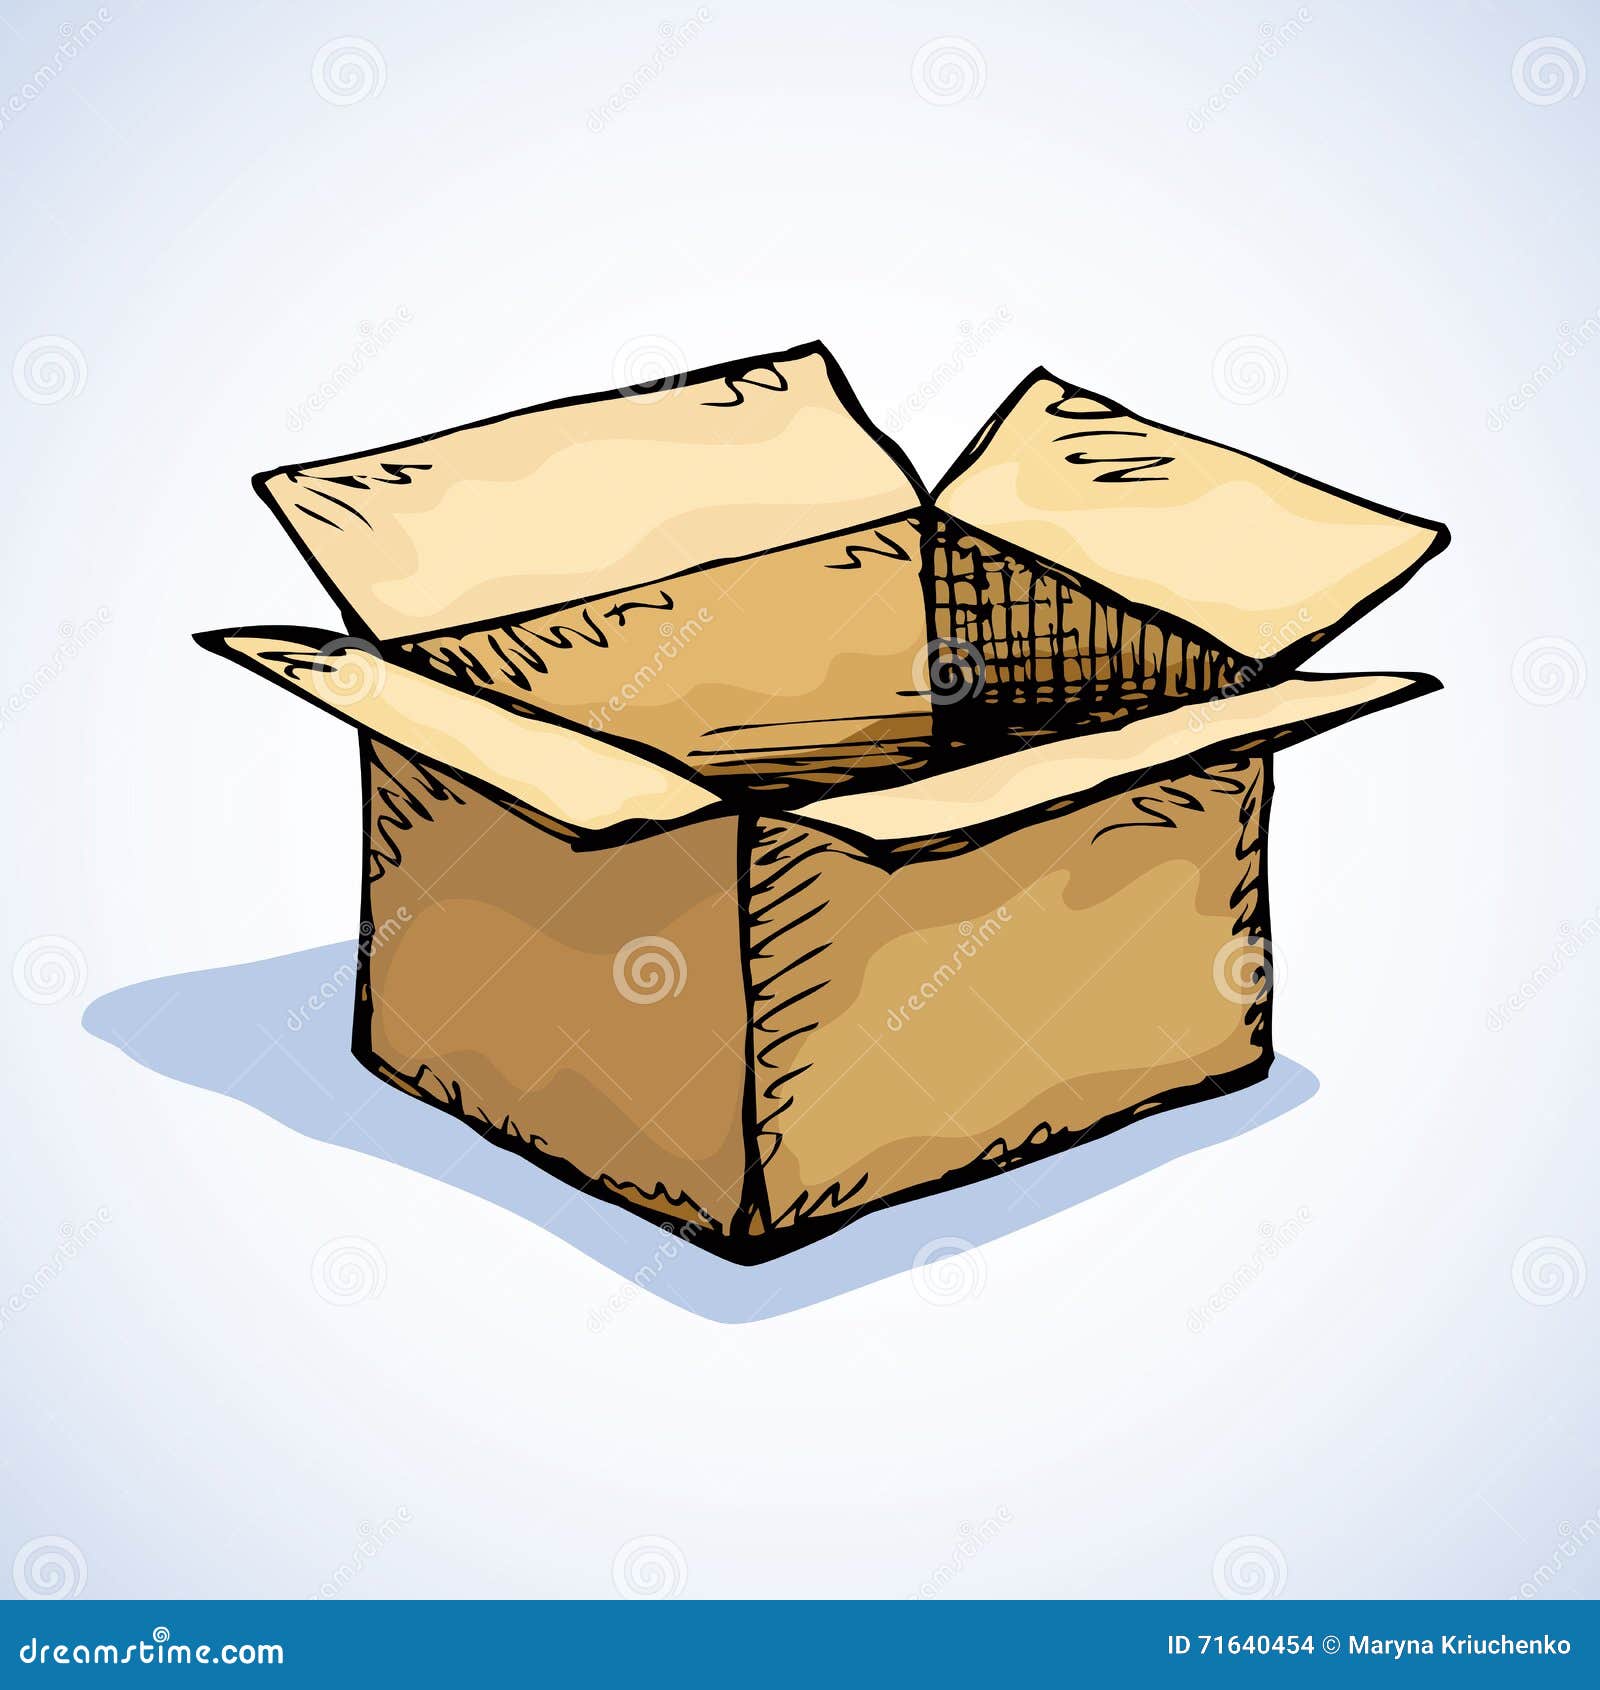 https://thumbs.dreamstime.com/z/cardboard-box-vector-drawing-pasteboard-blank-old-square-case-white-backdrop-freehand-outline-color-hand-drawn-scribble-picture-71640454.jpg